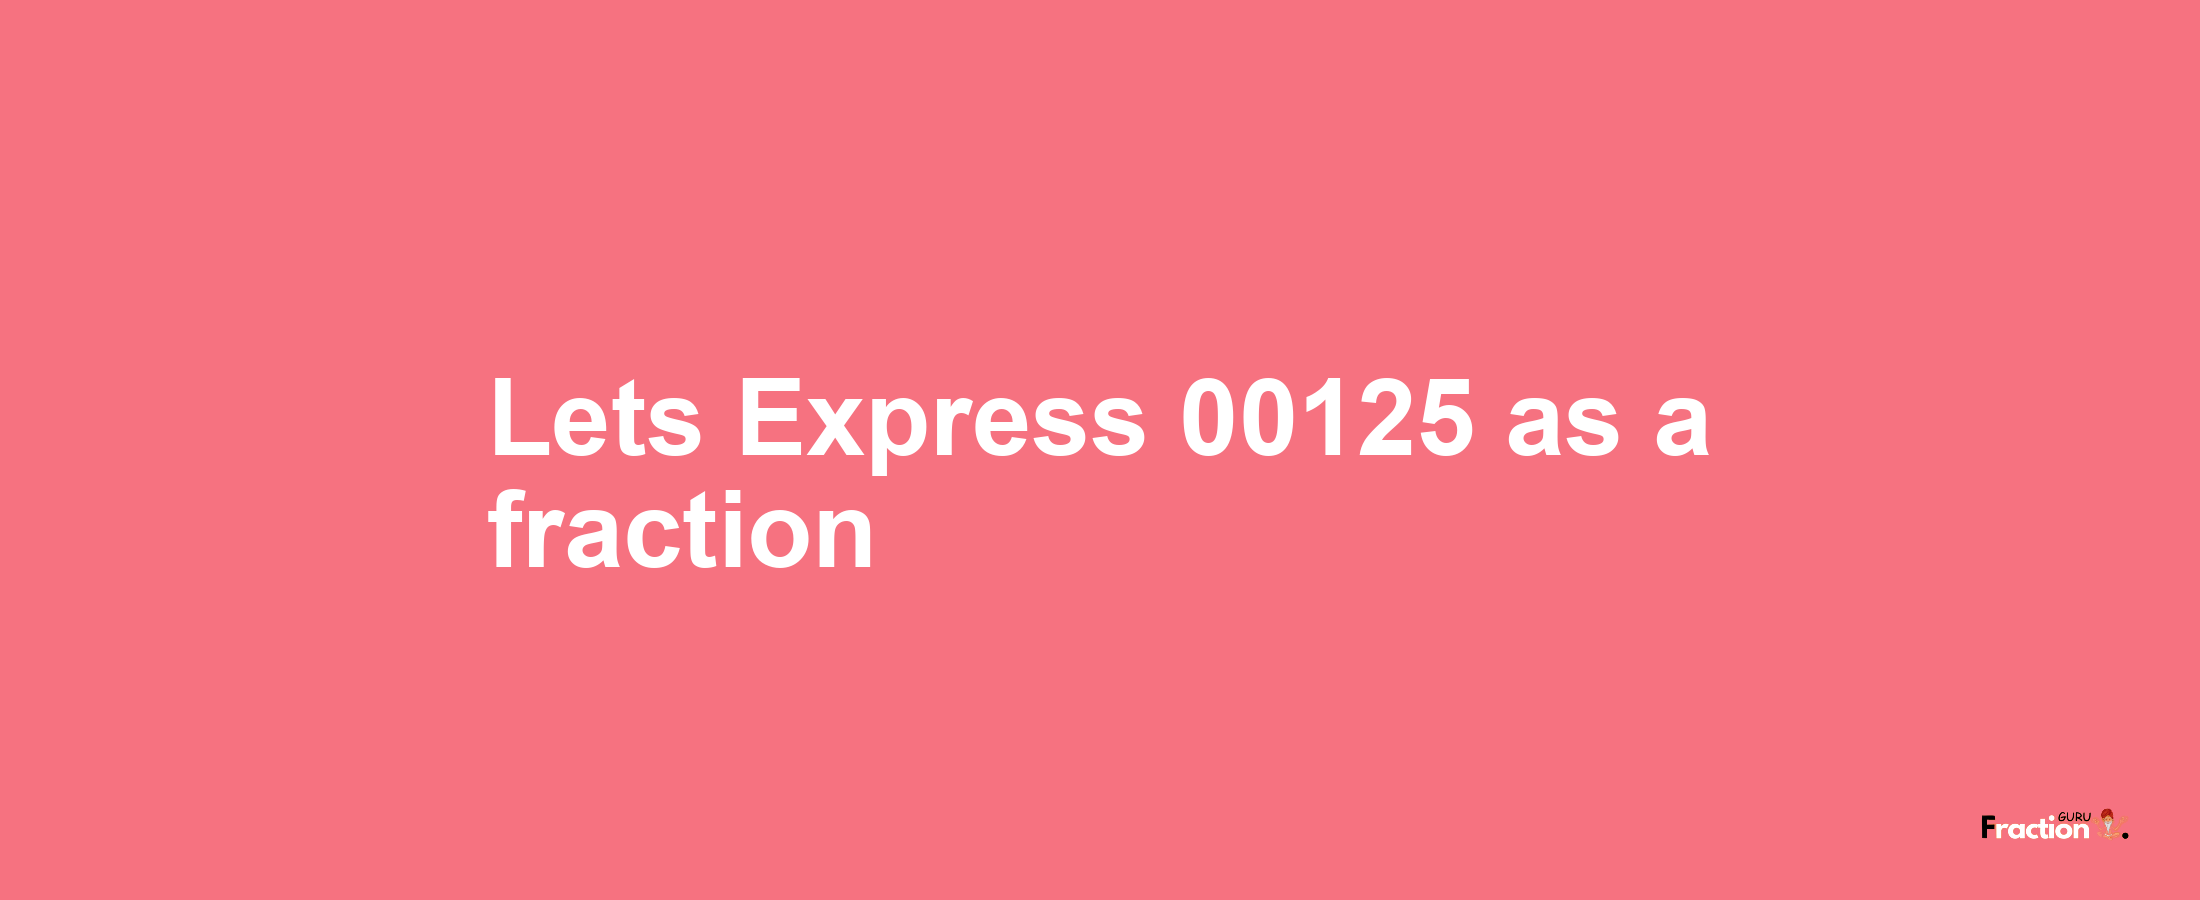 Lets Express 00125 as afraction